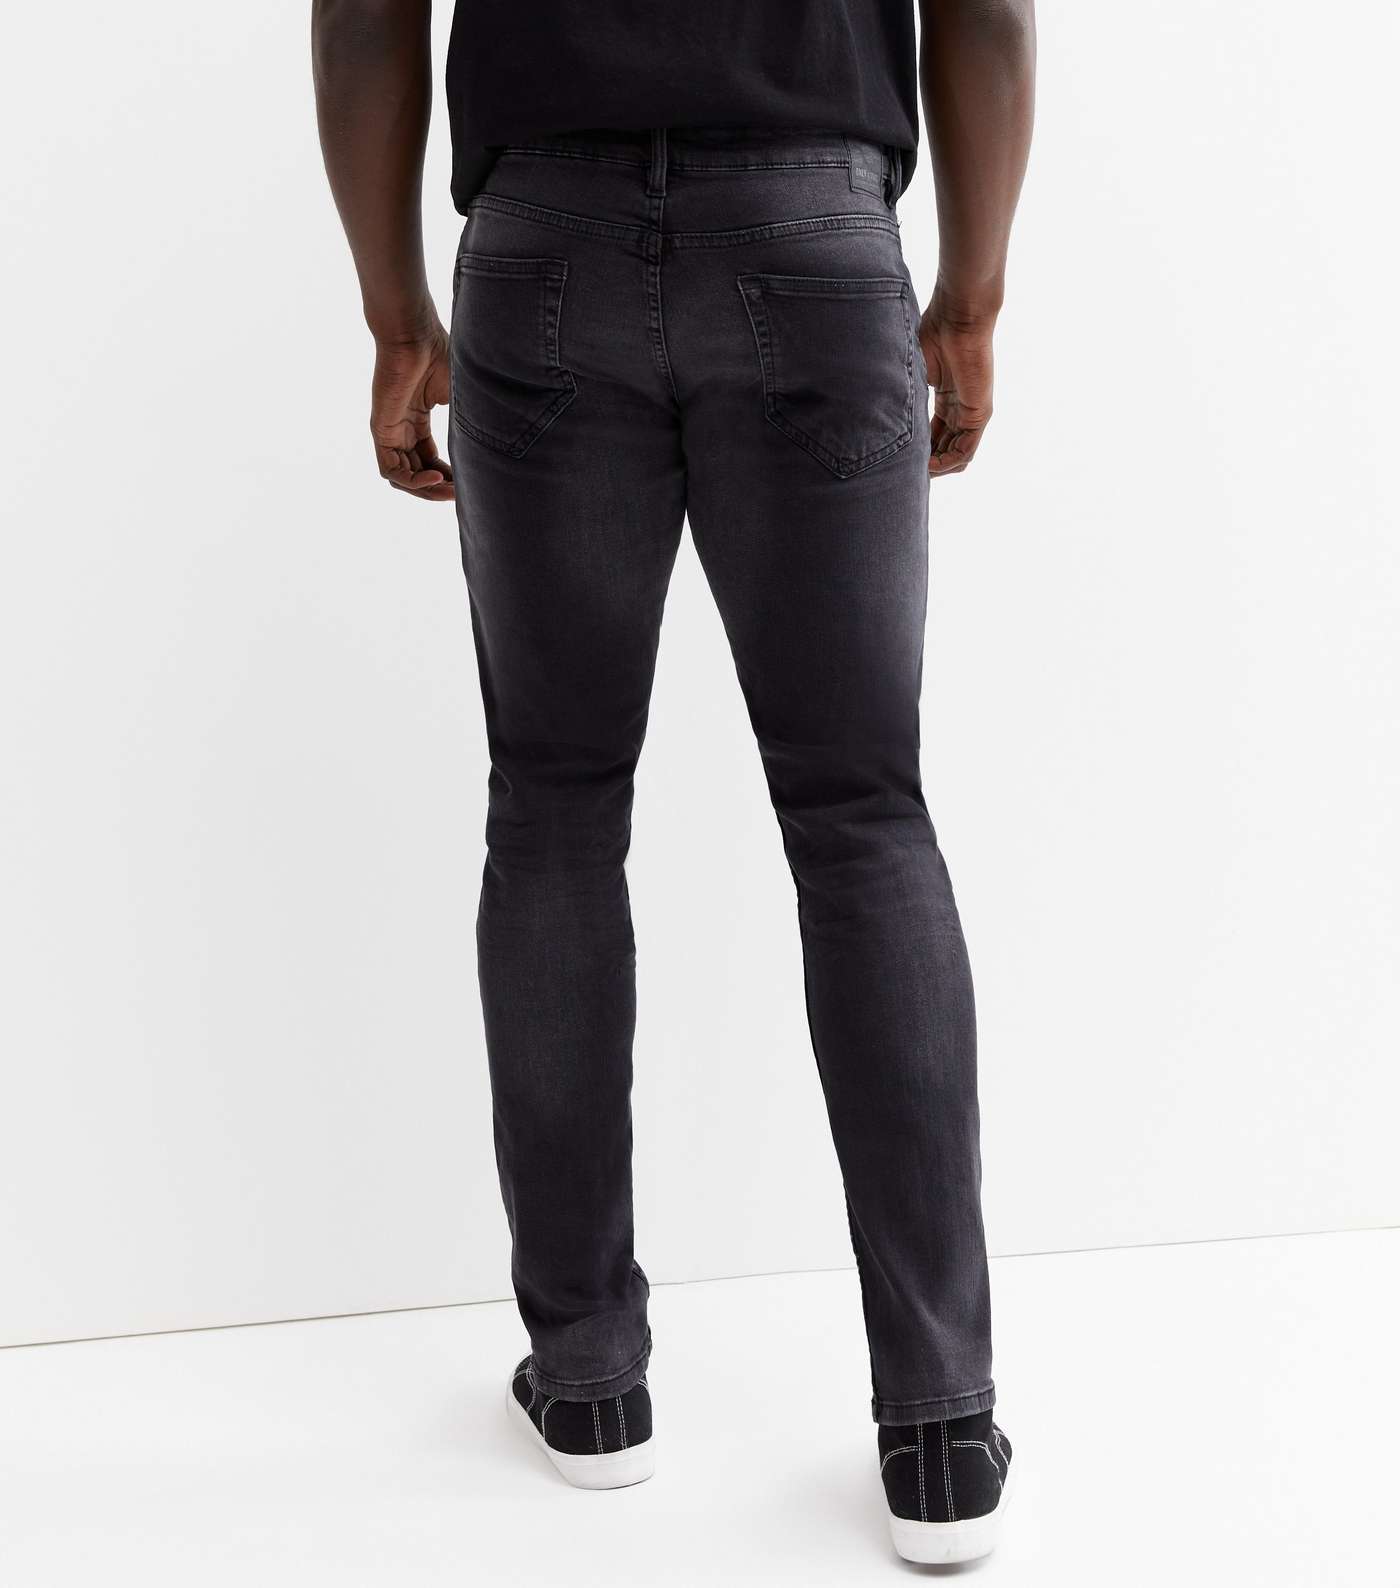 Only & Sons Black Slim Fit Tapered Jeans Image 4